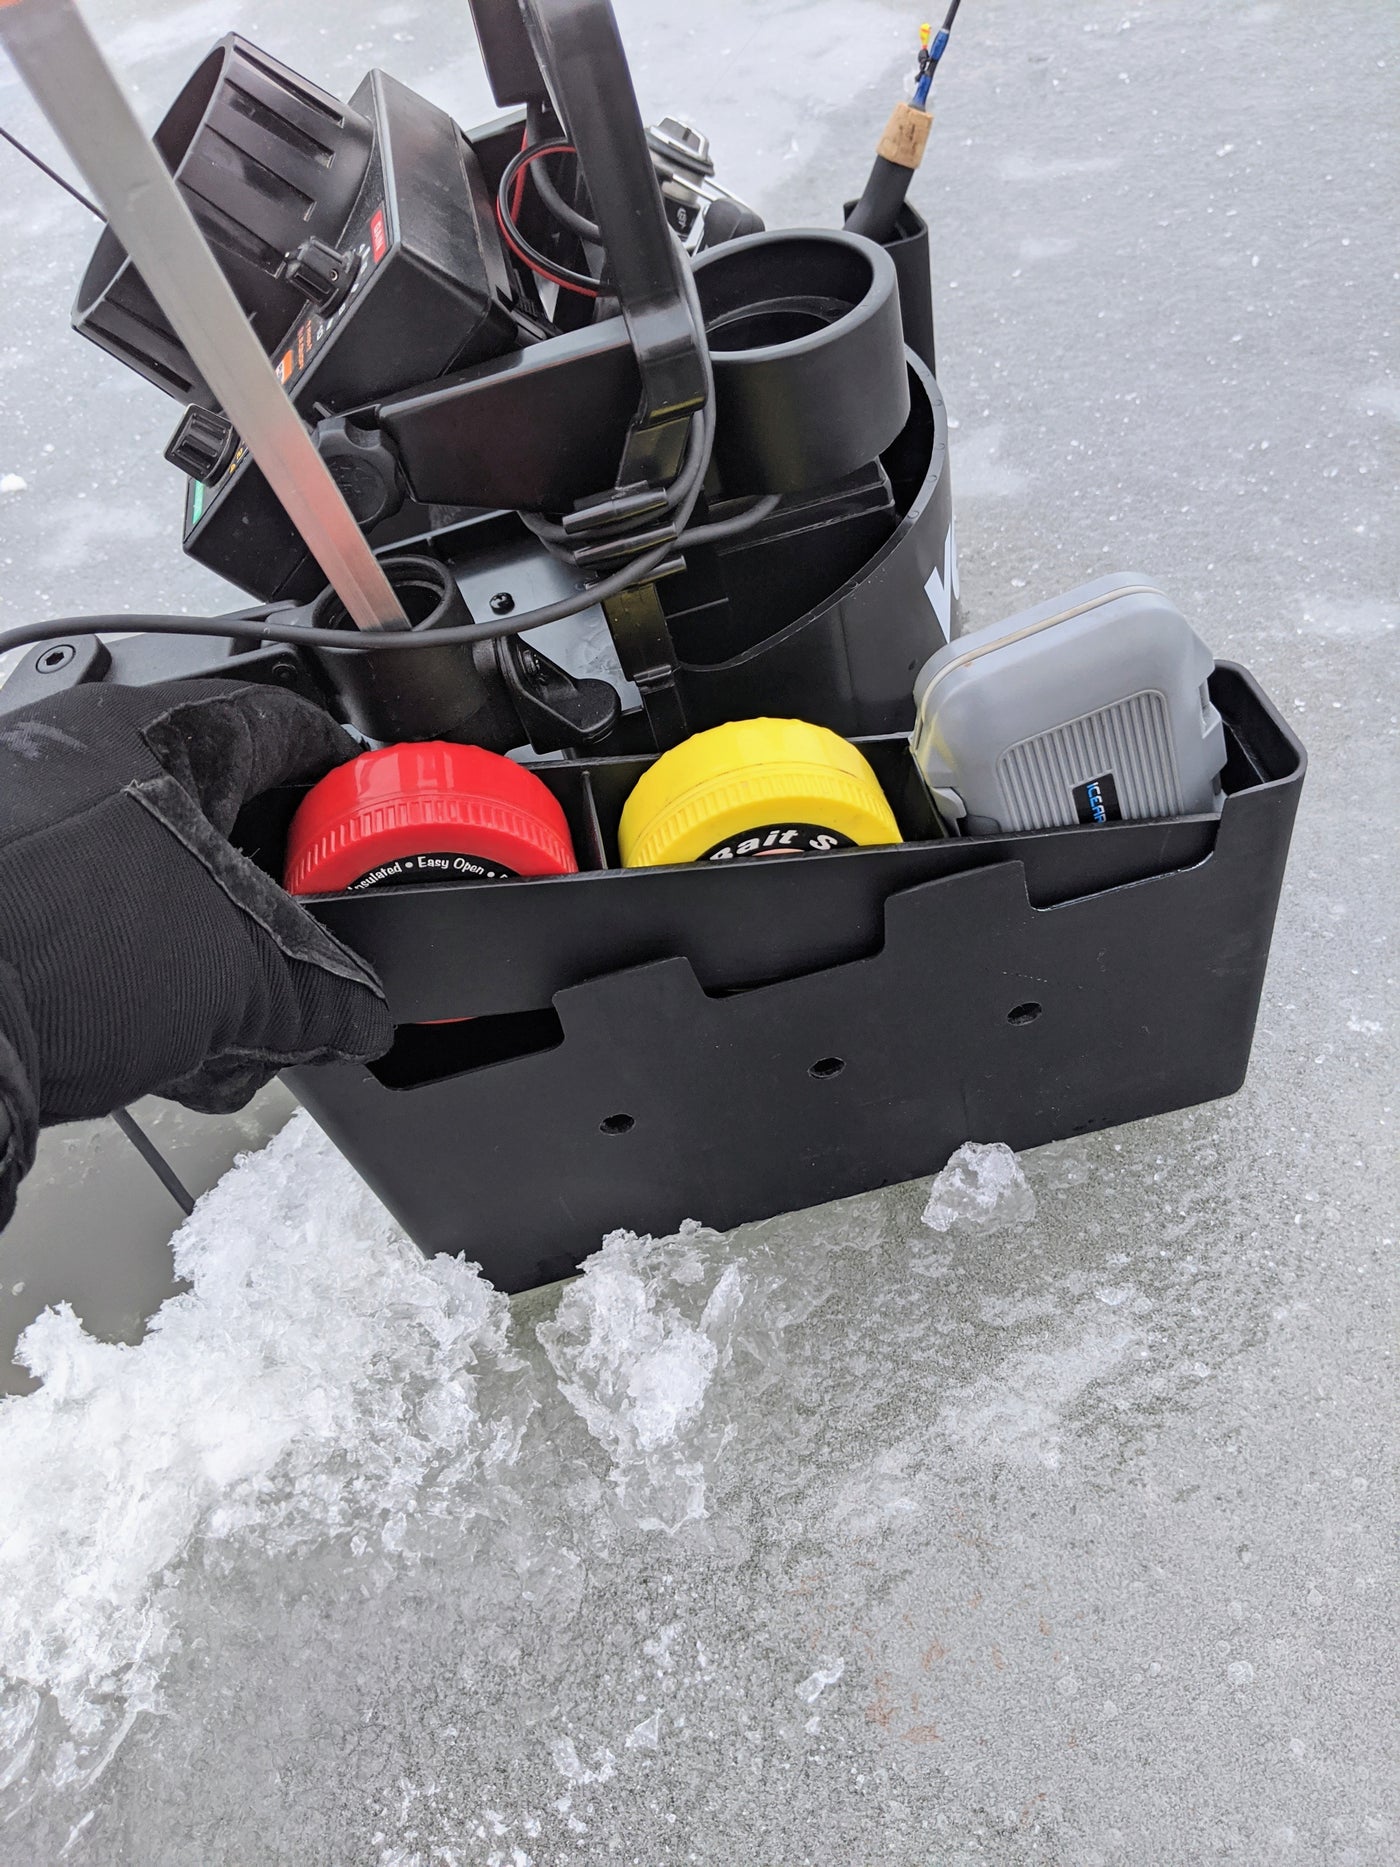 Ice Fishing Sled Ideas: Modifications to Improve Space